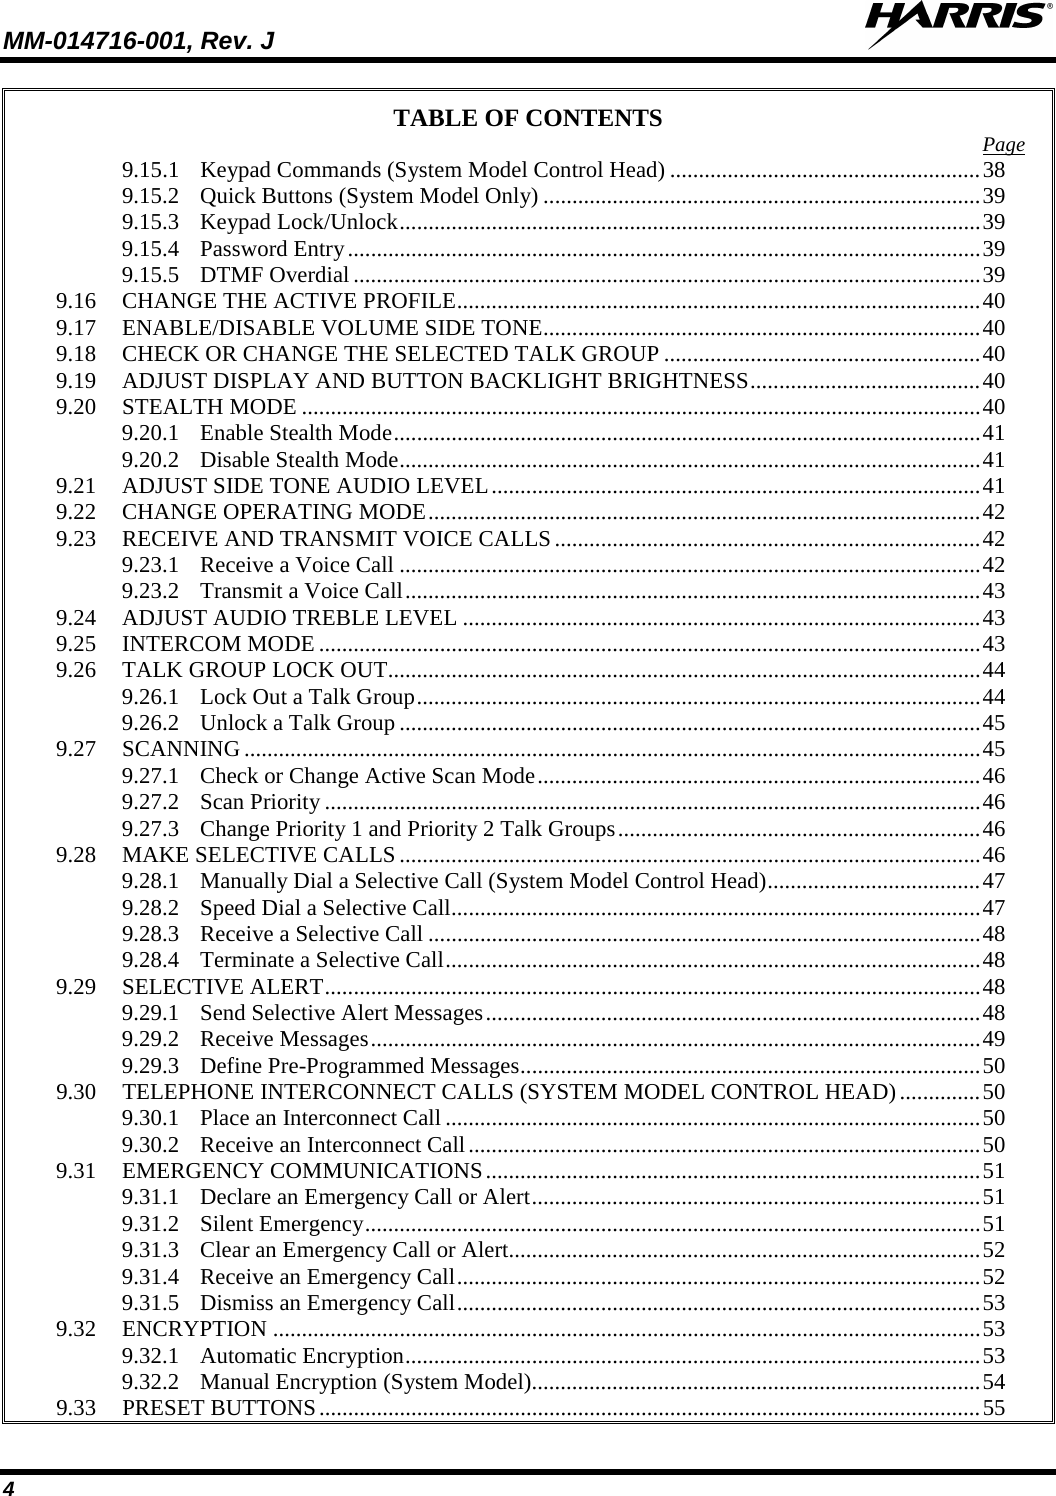 MM-014716-001, Rev. J  4 TABLE OF CONTENTS Page 9.15.1 Keypad Commands (System Model Control Head) ...................................................... 38 9.15.2 Quick Buttons (System Model Only) ............................................................................ 39 9.15.3 Keypad Lock/Unlock ..................................................................................................... 39 9.15.4 Password Entry .............................................................................................................. 39 9.15.5 DTMF Overdial ............................................................................................................. 39 9.16 CHANGE THE ACTIVE PROFILE ........................................................................................... 40 9.17 ENABLE/DISABLE VOLUME SIDE TONE ............................................................................ 40 9.18 CHECK OR CHANGE THE SELECTED TALK GROUP ....................................................... 40 9.19 ADJUST DISPLAY AND BUTTON BACKLIGHT BRIGHTNESS ........................................ 40 9.20 STEALTH MODE ...................................................................................................................... 40 9.20.1 Enable Stealth Mode ...................................................................................................... 41 9.20.2 Disable Stealth Mode ..................................................................................................... 41 9.21 ADJUST SIDE TONE AUDIO LEVEL ..................................................................................... 41 9.22 CHANGE OPERATING MODE ................................................................................................ 42 9.23 RECEIVE AND TRANSMIT VOICE CALLS .......................................................................... 42 9.23.1 Receive a Voice Call ..................................................................................................... 42 9.23.2 Transmit a Voice Call .................................................................................................... 43 9.24 ADJUST AUDIO TREBLE LEVEL .......................................................................................... 43 9.25 INTERCOM MODE ................................................................................................................... 43 9.26 TALK GROUP LOCK OUT ....................................................................................................... 44 9.26.1 Lock Out a Talk Group .................................................................................................. 44 9.26.2 Unlock a Talk Group ..................................................................................................... 45 9.27 SCANNING ................................................................................................................................ 45 9.27.1 Check or Change Active Scan Mode ............................................................................. 46 9.27.2 Scan Priority .................................................................................................................. 46 9.27.3 Change Priority 1 and Priority 2 Talk Groups ............................................................... 46 9.28 MAKE SELECTIVE CALLS ..................................................................................................... 46 9.28.1 Manually Dial a Selective Call (System Model Control Head) ..................................... 47 9.28.2 Speed Dial a Selective Call ............................................................................................ 47 9.28.3 Receive a Selective Call ................................................................................................ 48 9.28.4 Terminate a Selective Call ............................................................................................. 48 9.29 SELECTIVE ALERT .................................................................................................................. 48 9.29.1 Send Selective Alert Messages ...................................................................................... 48 9.29.2 Receive Messages .......................................................................................................... 49 9.29.3 Define Pre-Programmed Messages ................................................................................ 50 9.30 TELEPHONE INTERCONNECT CALLS (SYSTEM MODEL CONTROL HEAD) .............. 50 9.30.1 Place an Interconnect Call ............................................................................................. 50 9.30.2 Receive an Interconnect Call ......................................................................................... 50 9.31 EMERGENCY COMMUNICATIONS ...................................................................................... 51 9.31.1 Declare an Emergency Call or Alert .............................................................................. 51 9.31.2 Silent Emergency ........................................................................................................... 51 9.31.3 Clear an Emergency Call or Alert.................................................................................. 52 9.31.4 Receive an Emergency Call ........................................................................................... 52 9.31.5 Dismiss an Emergency Call ........................................................................................... 53 9.32 ENCRYPTION ........................................................................................................................... 53 9.32.1 Automatic Encryption .................................................................................................... 53 9.32.2 Manual Encryption (System Model).............................................................................. 54 9.33 PRESET BUTTONS ................................................................................................................... 55 